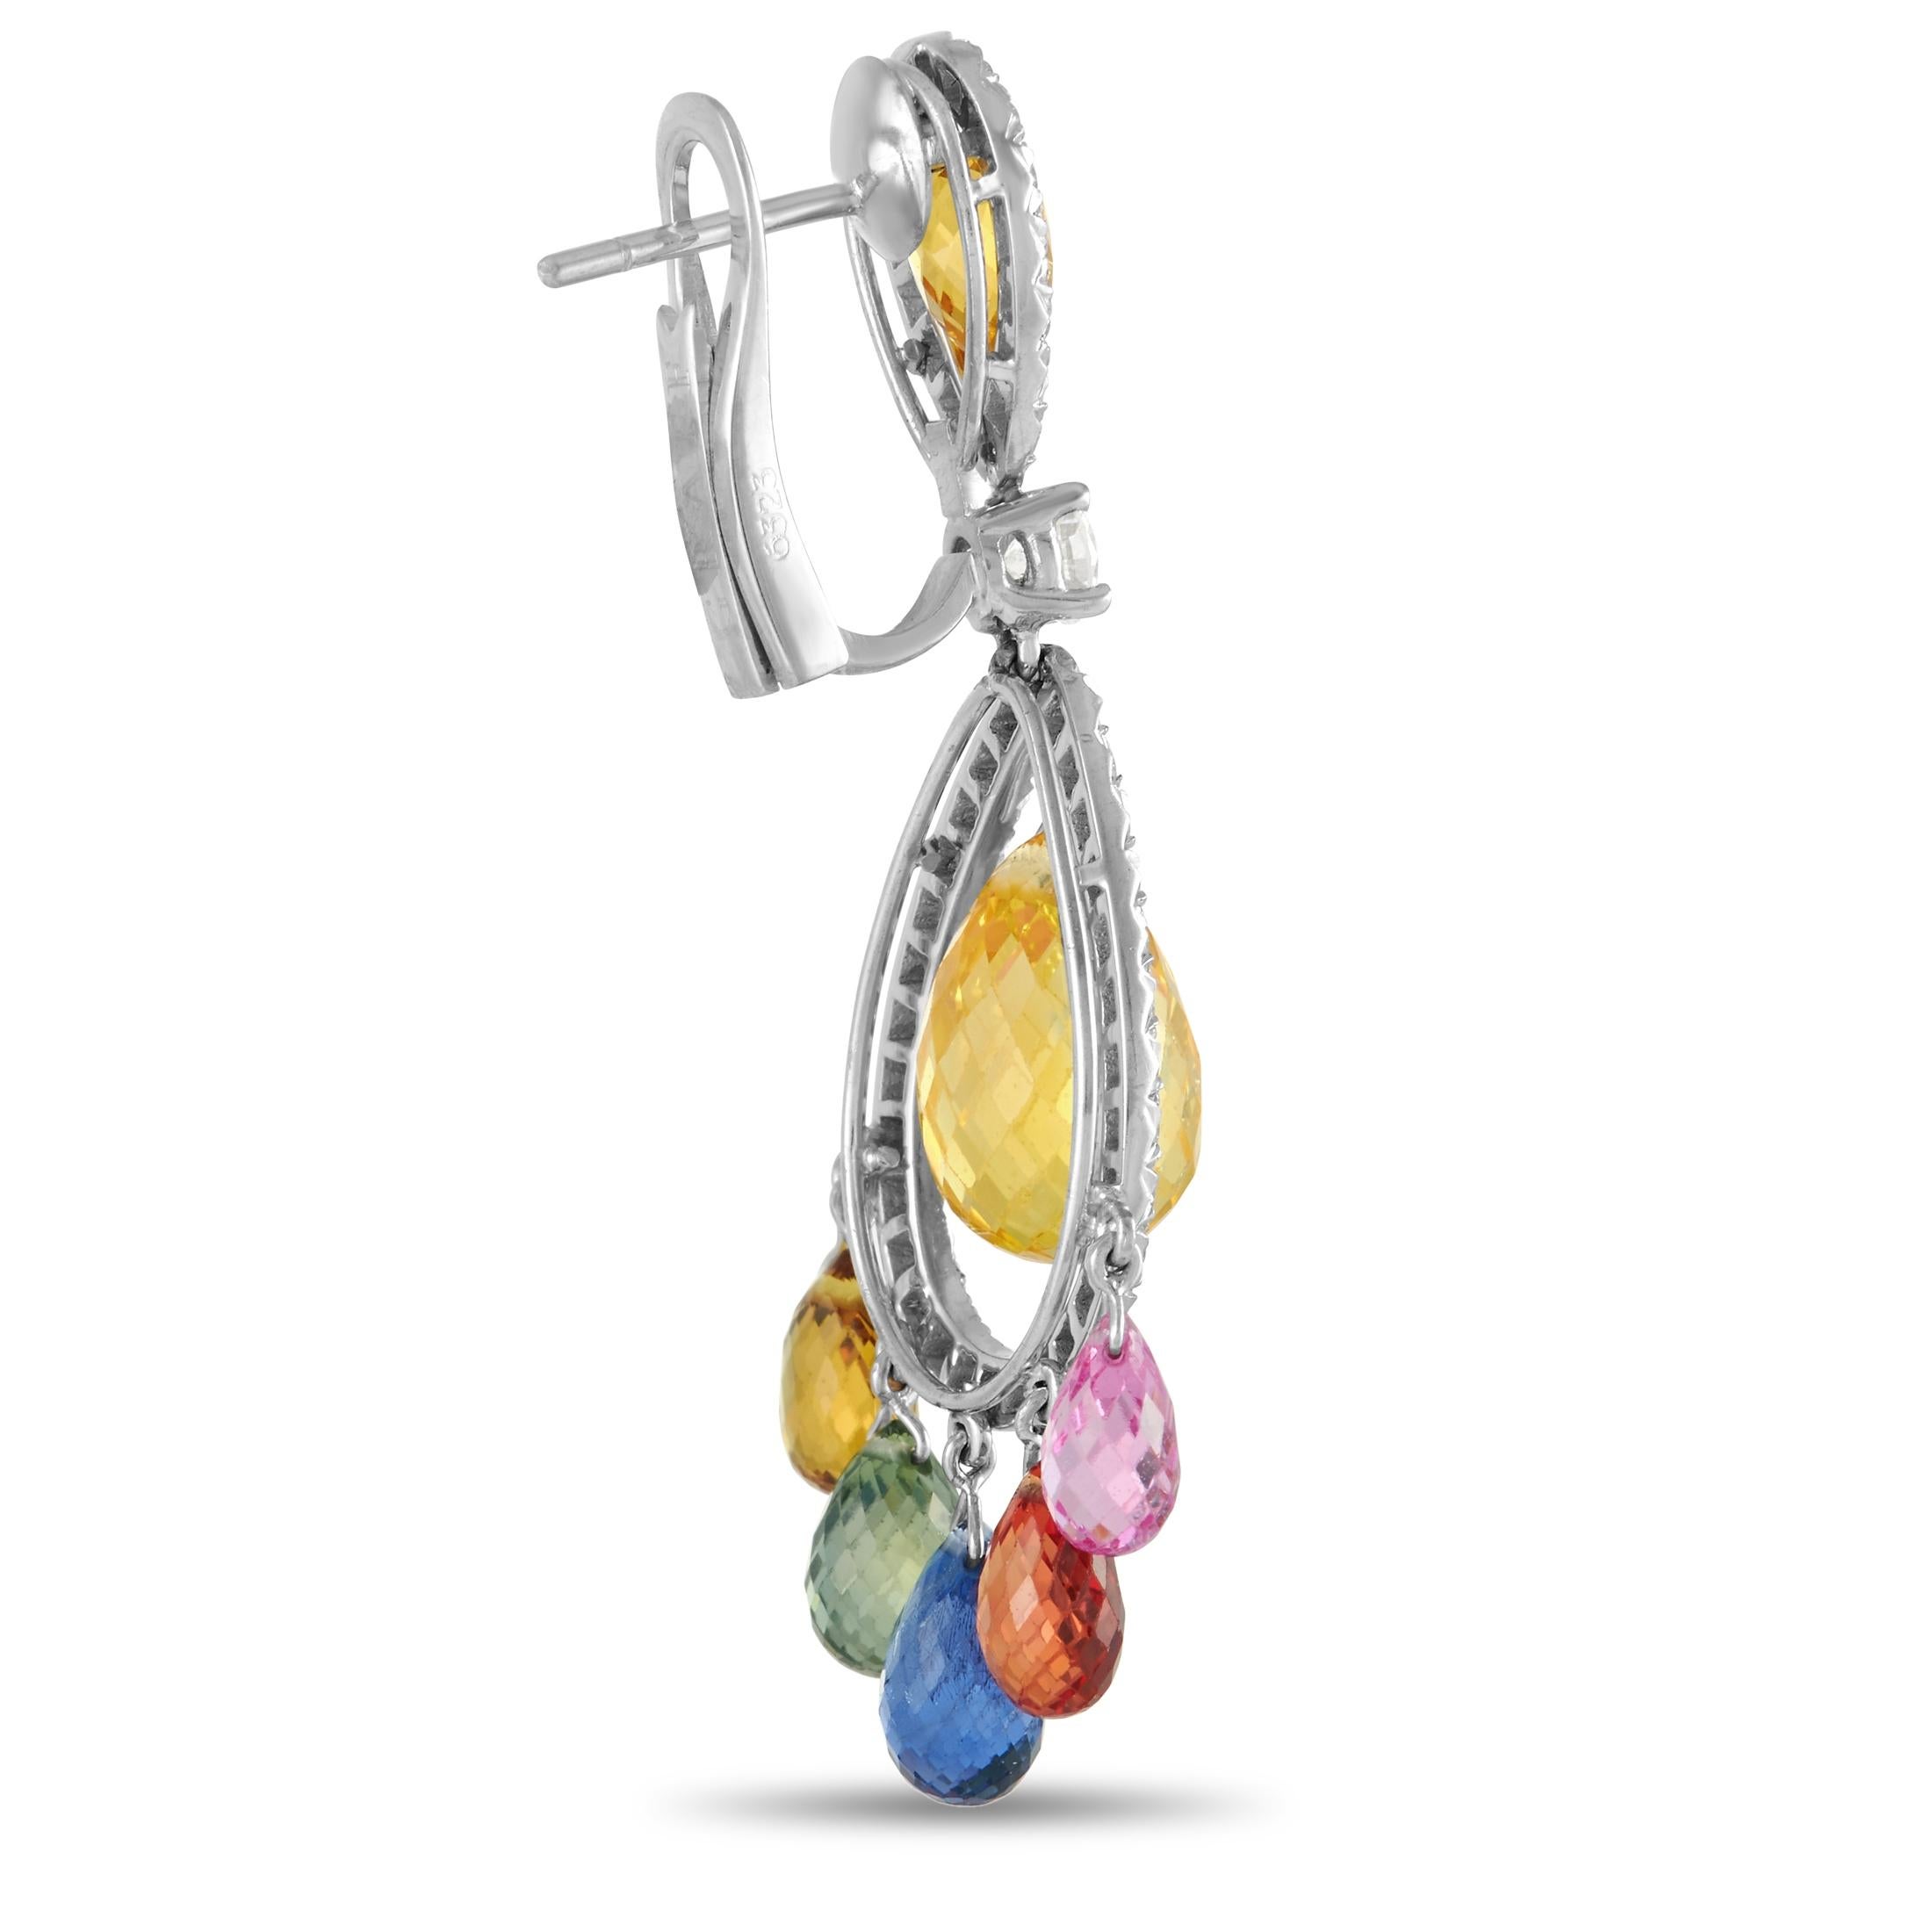 Graff 18K White Gold Diamond & Multicolored Sapphire Necklace and Earrings Set 1